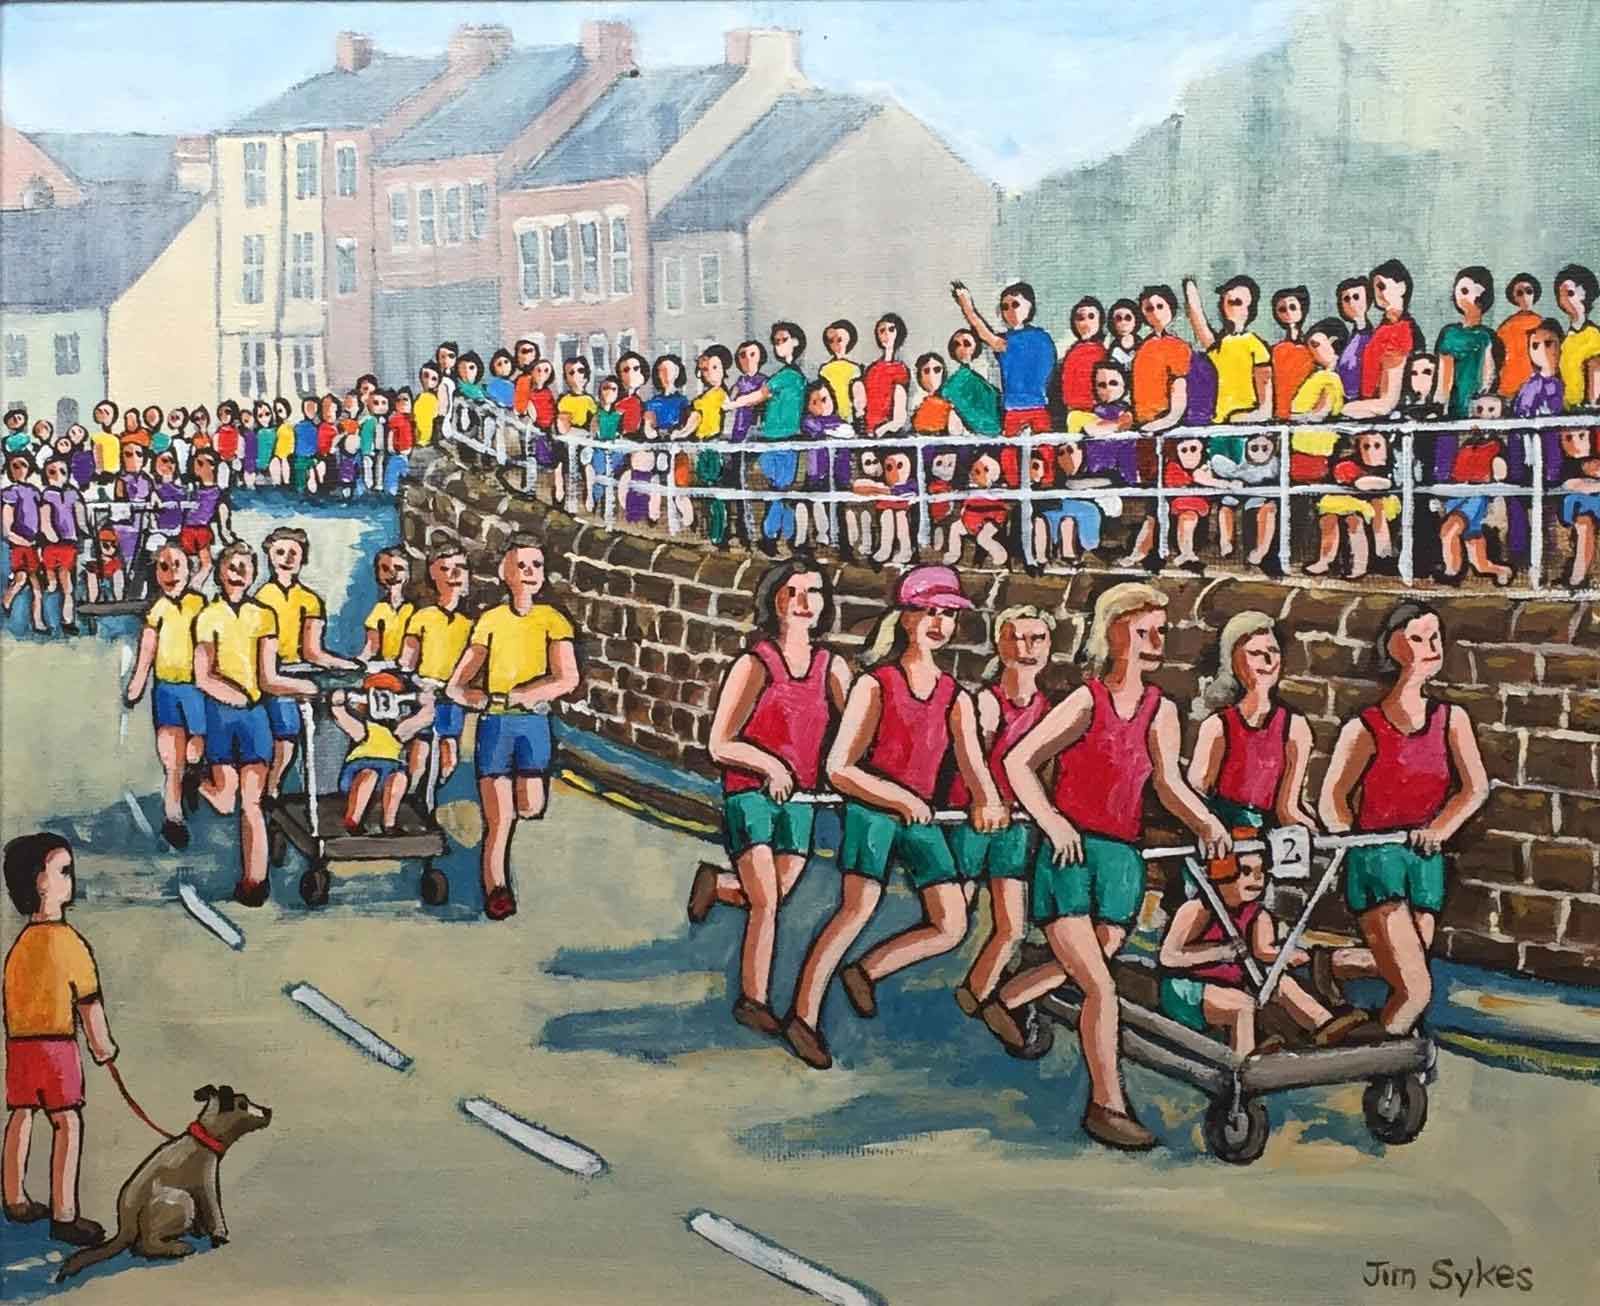 Knareborough Bed Race by Jim Sykes (courtesy of Art in the Mill)